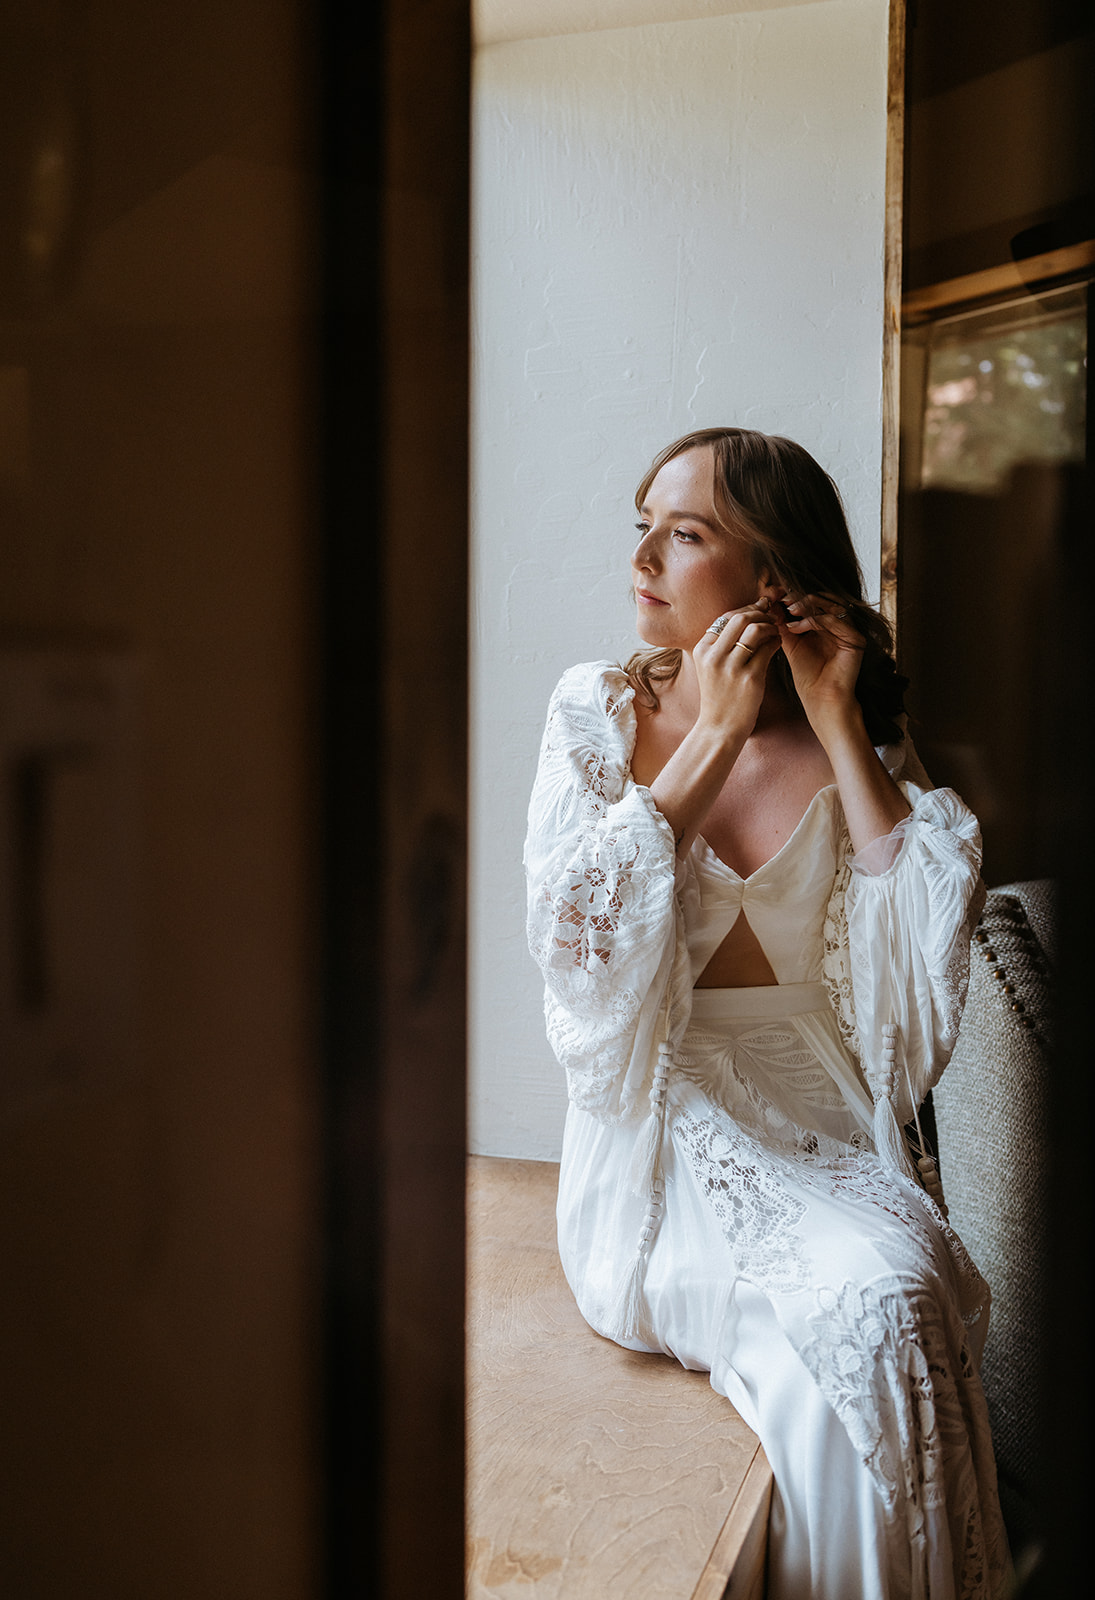 A bride sits in a window sill putting on her ear rings in a white lace dress